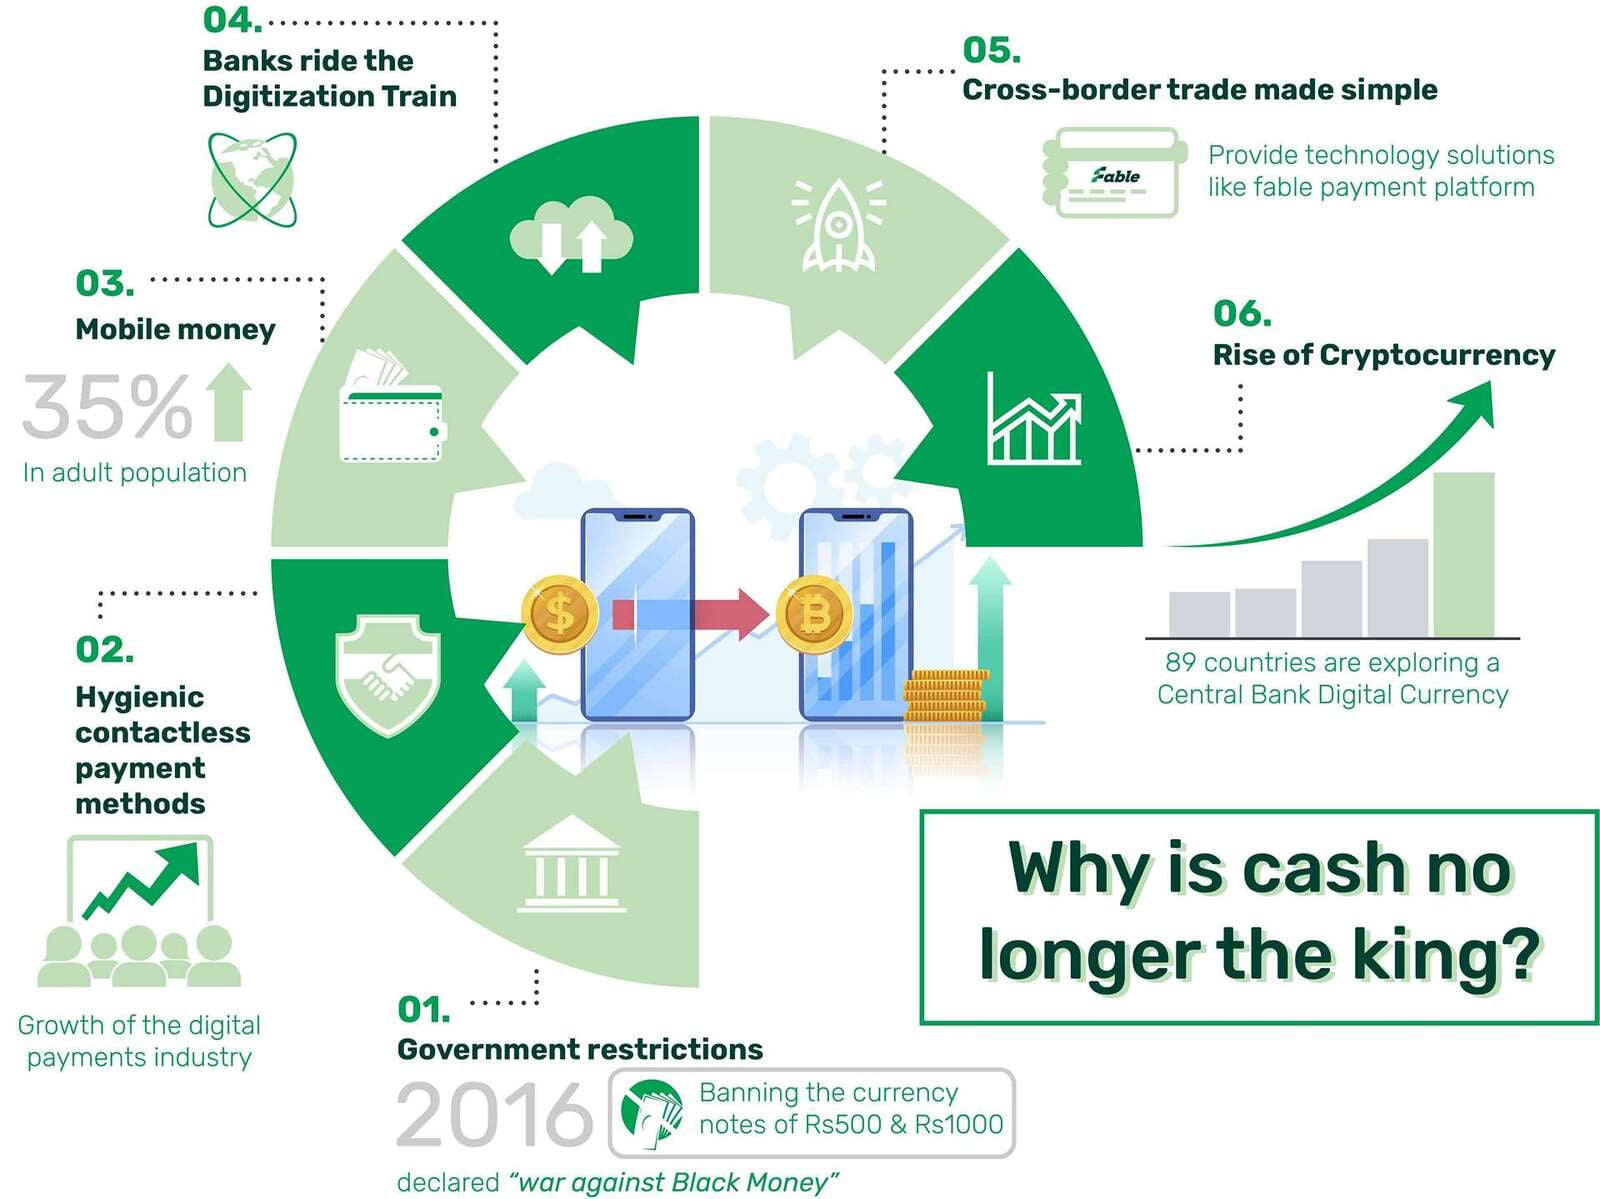 Why cash is no longer king?